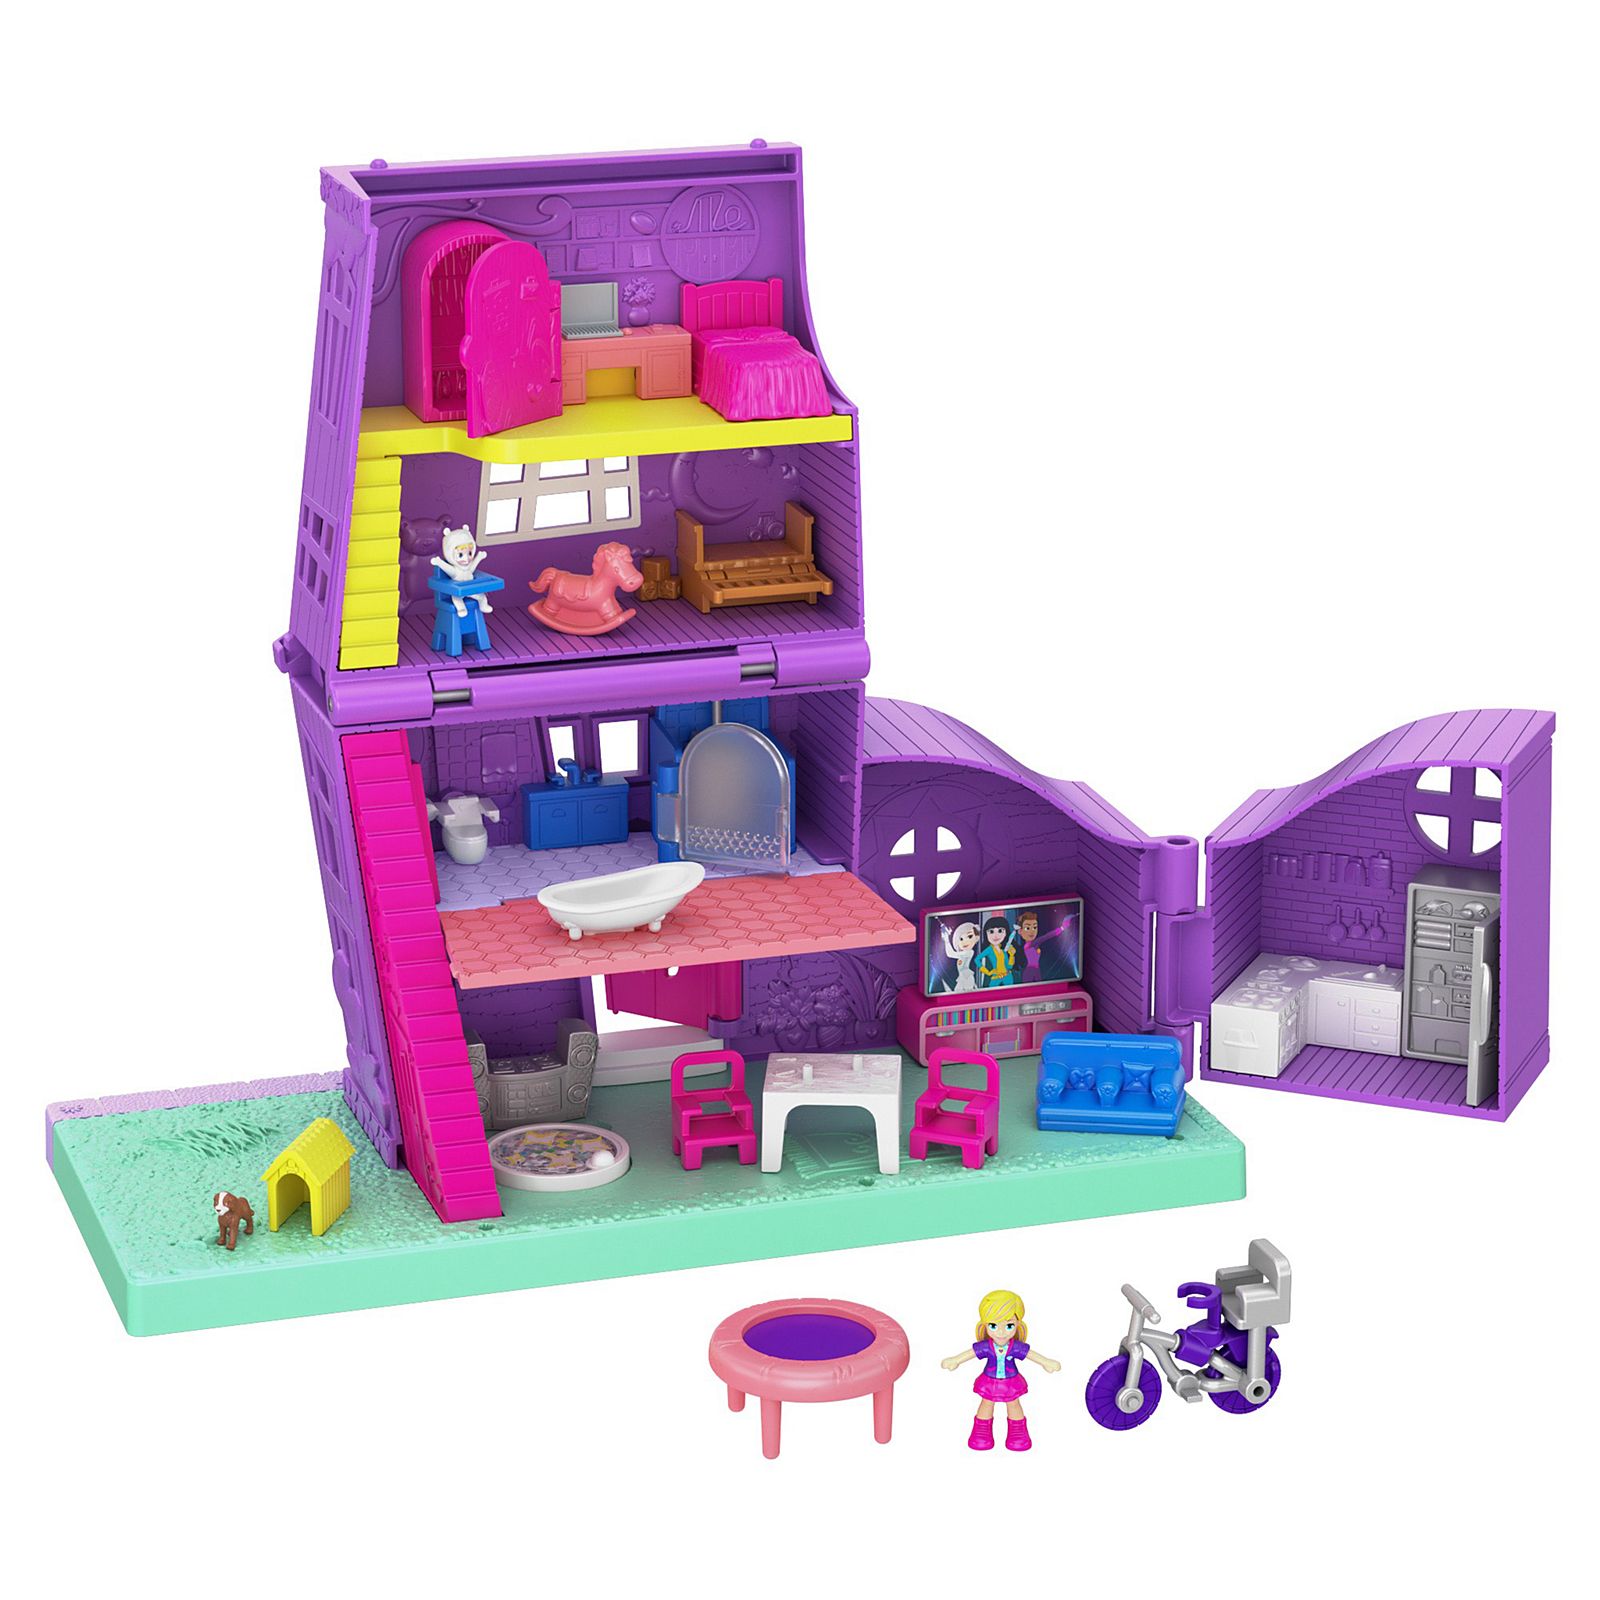 Polly Pocket Spin 'n Surprise Compact Playset, Tropical Smoothie